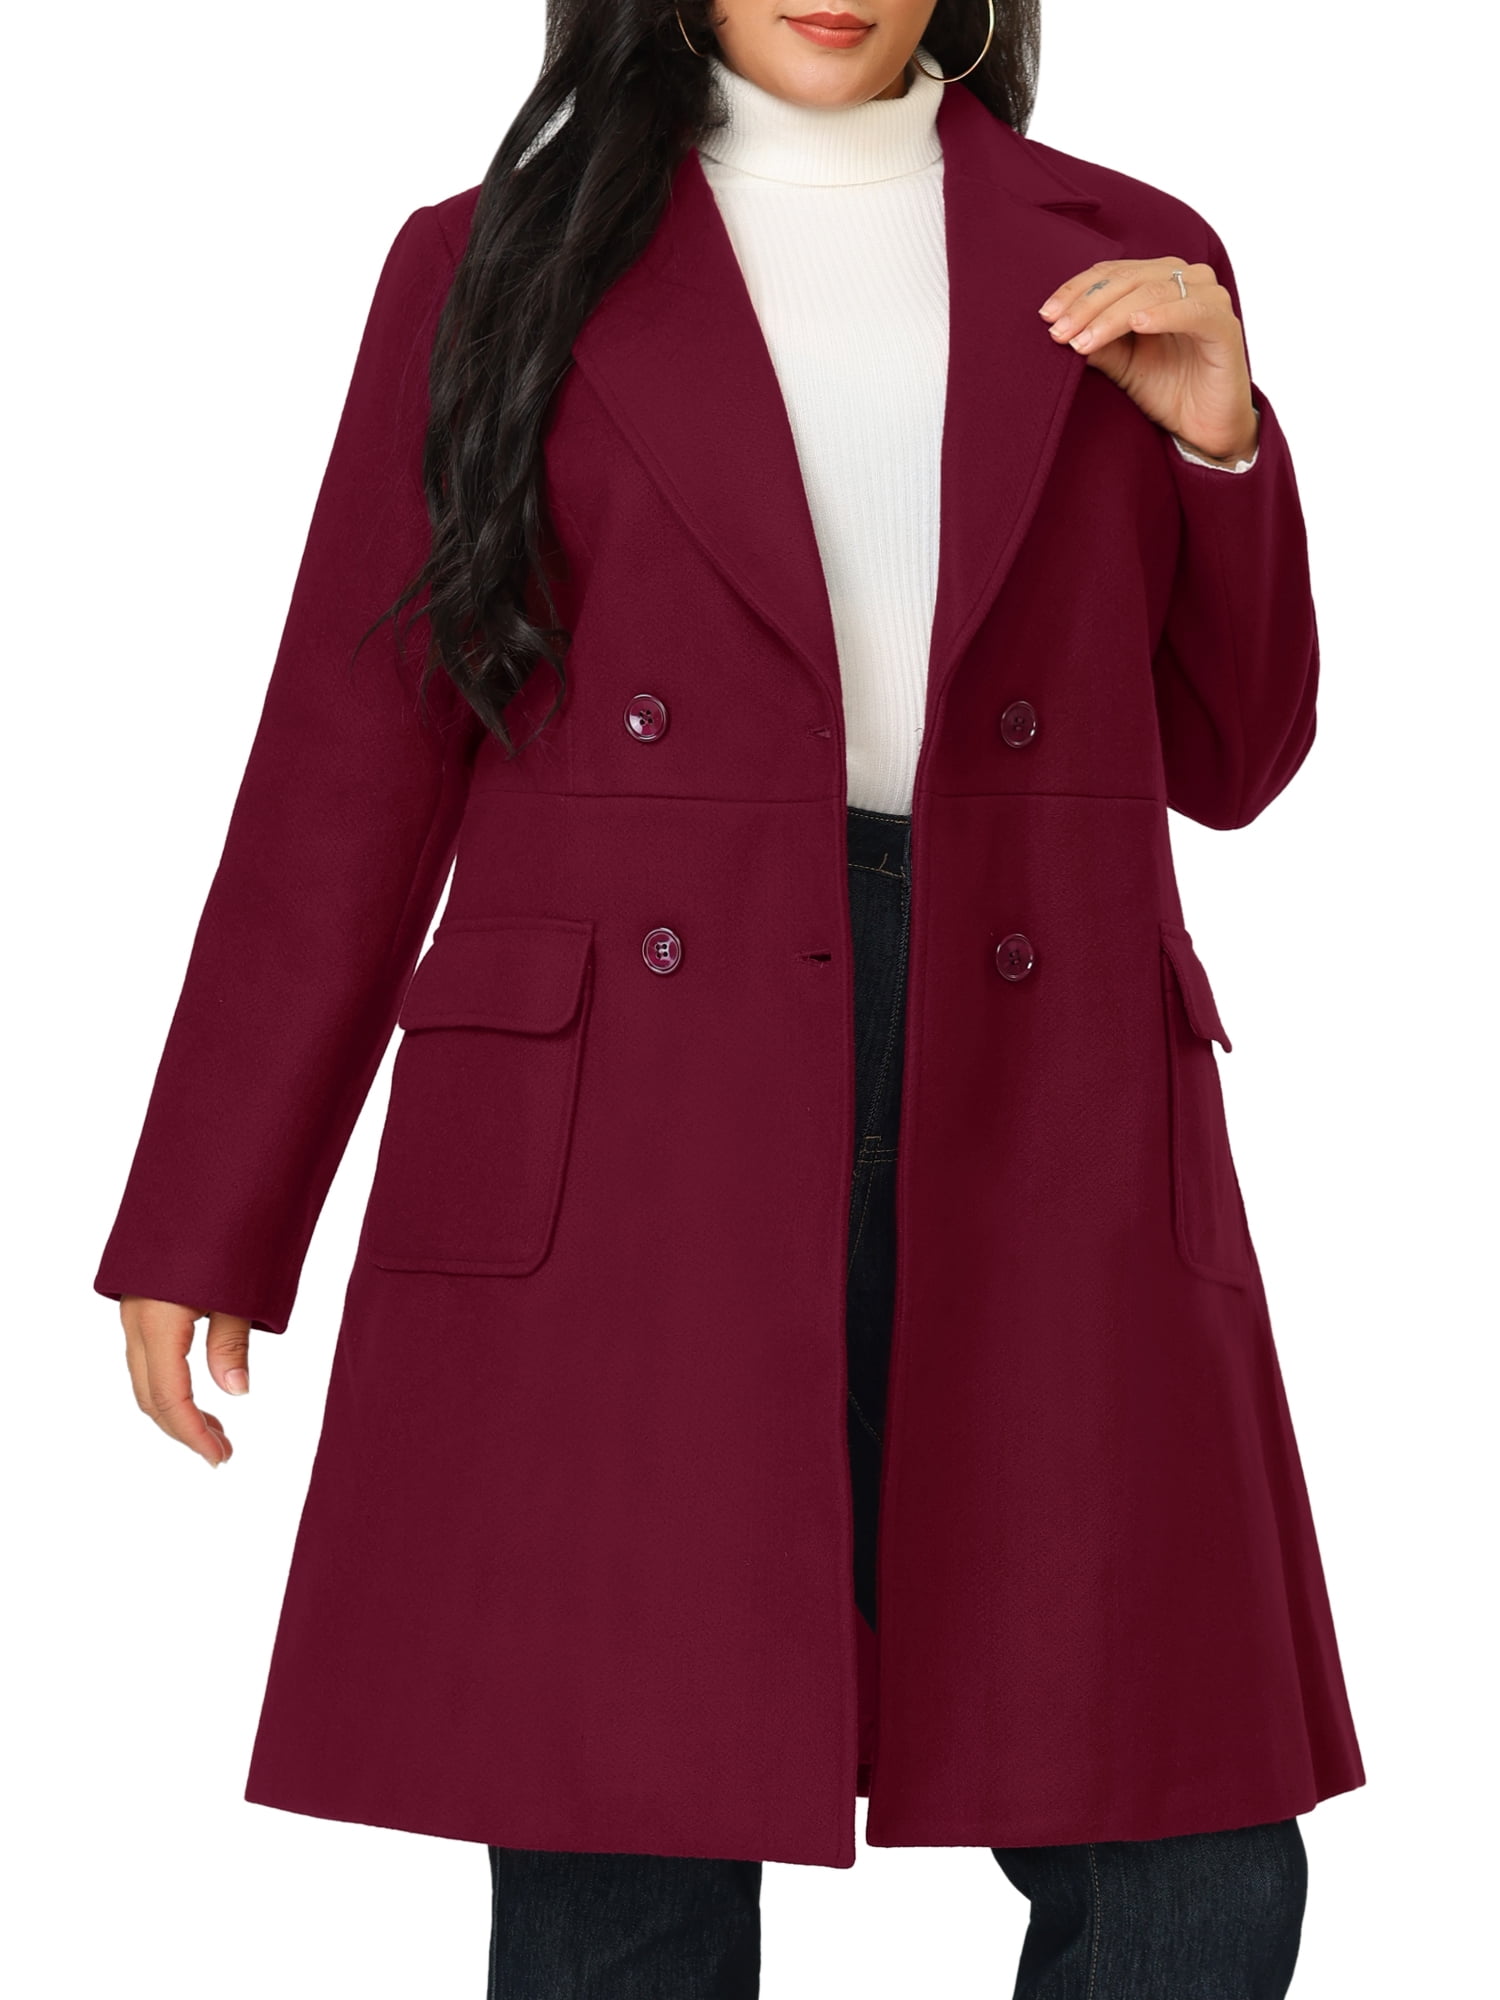 Agnes Orinda Women's Plus Size Outerwear Overcoat Double Breasted Long ...